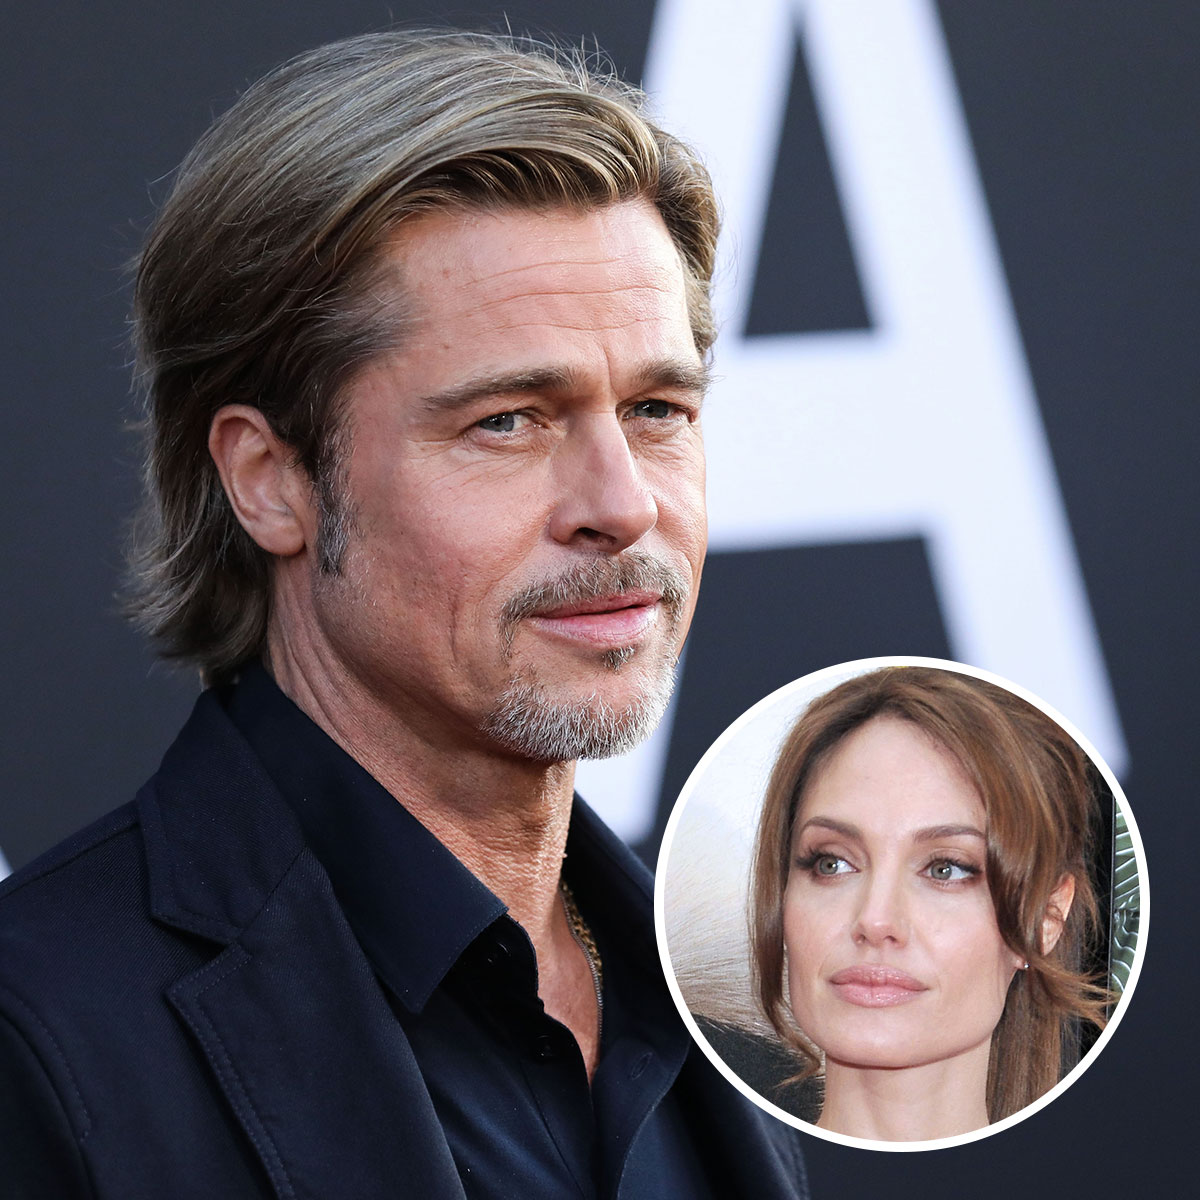 Where Does Brad Pitt Stand With His Children After Angelina Jolie